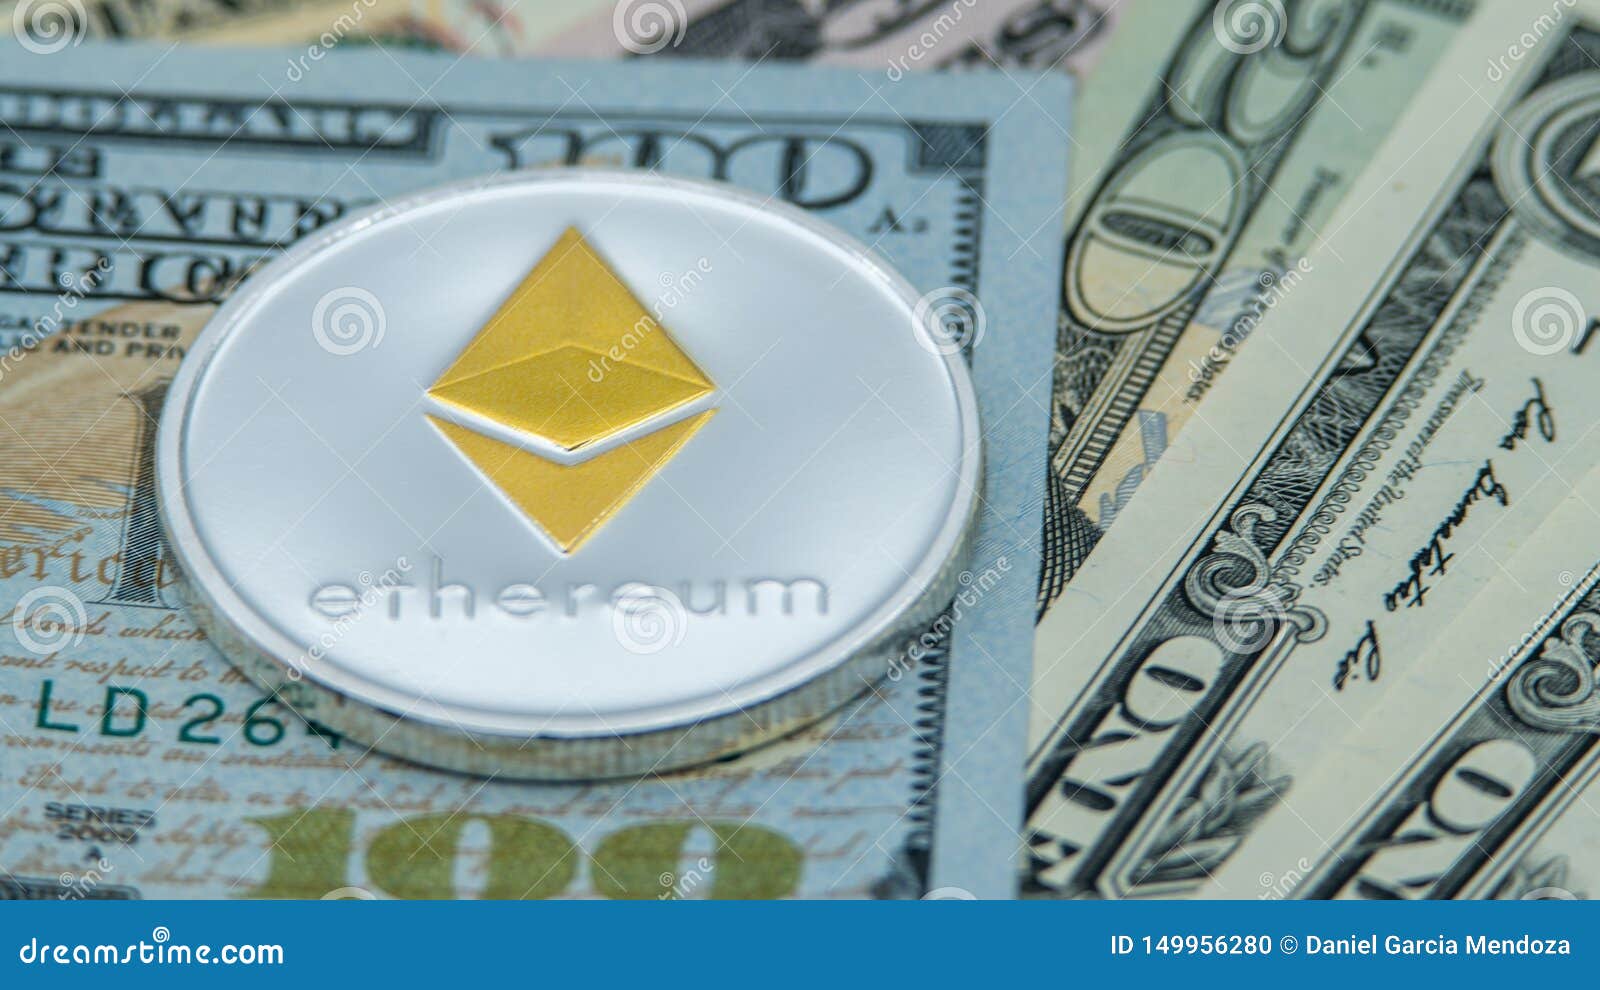 Physical Metal Silver Ethereum Currency Over Diferents ...